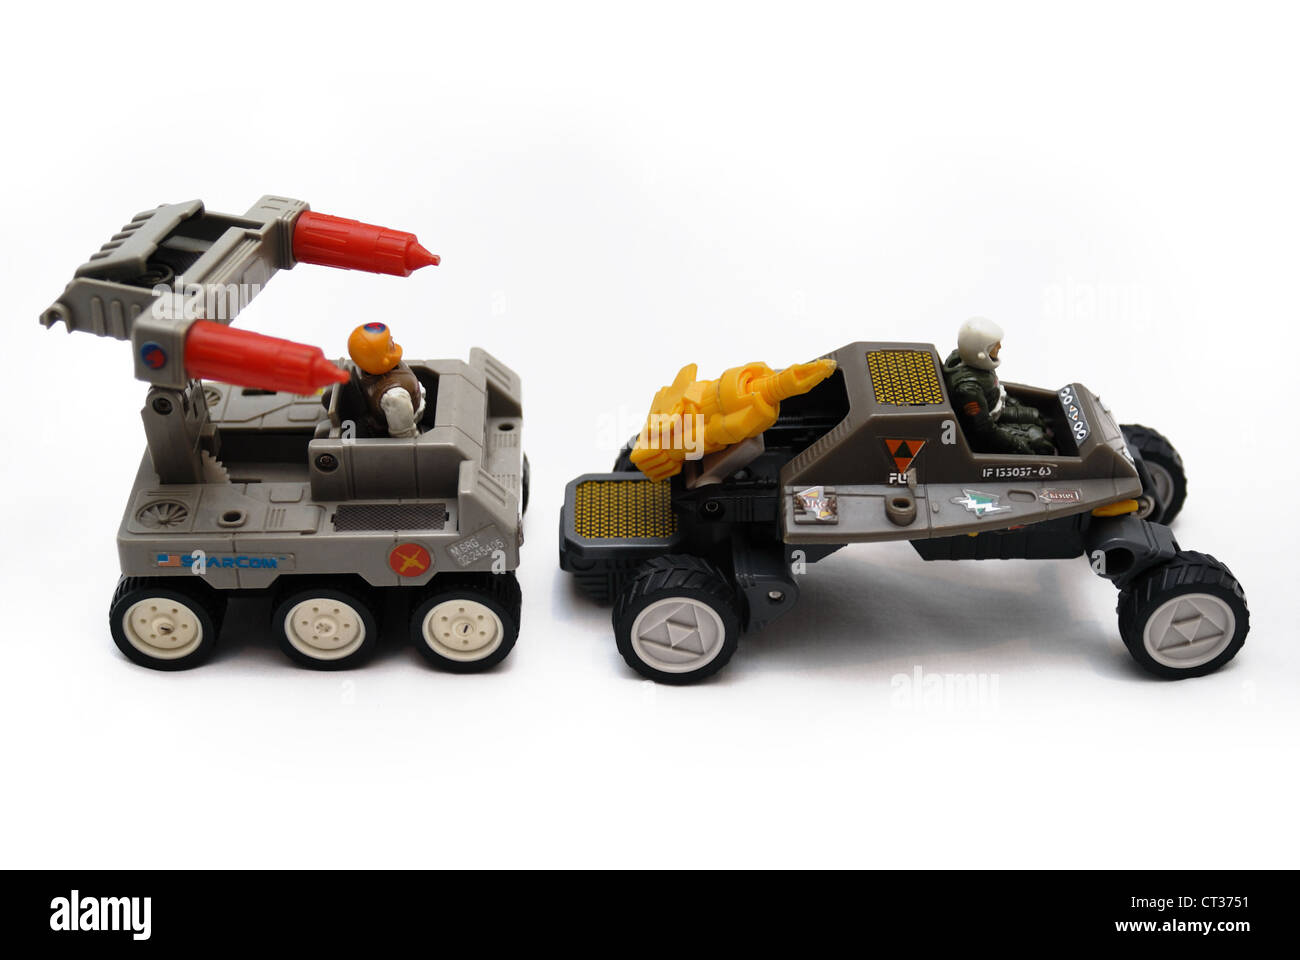 Two Starcom vintage space toys, land vehicles with guns, wheels and drivers. Stock Photo